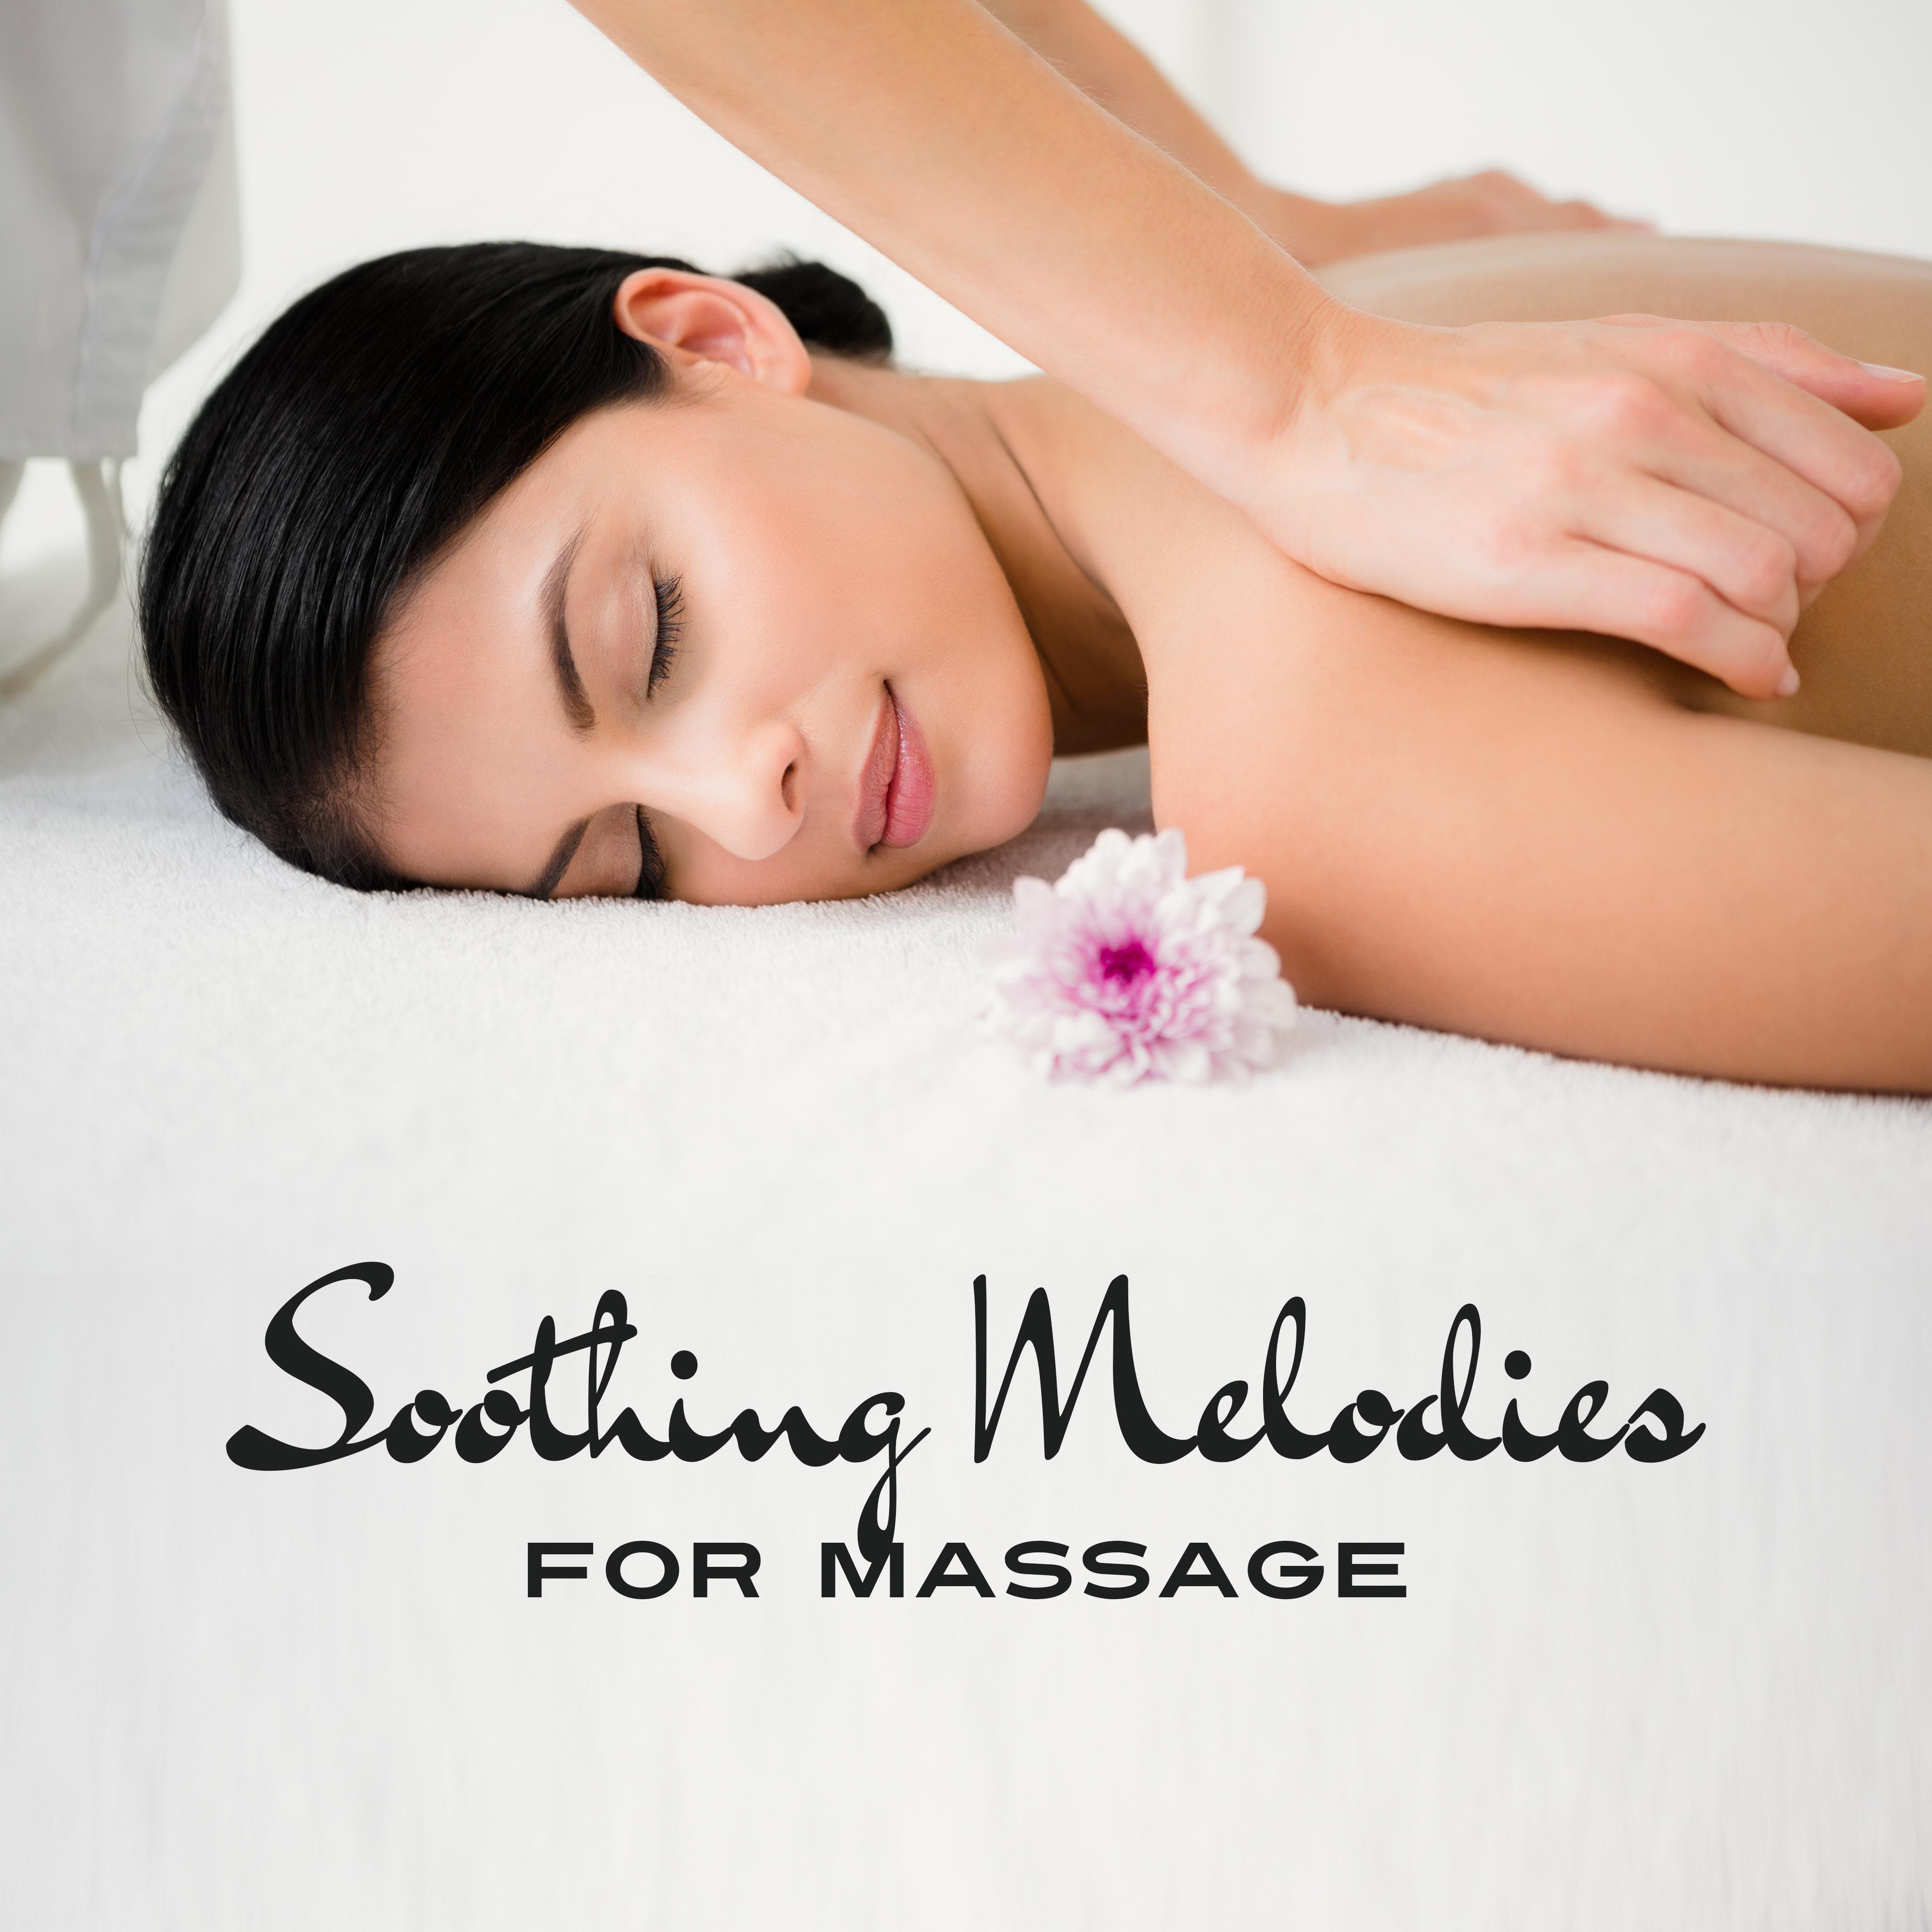 Soothing Melodies for Massage